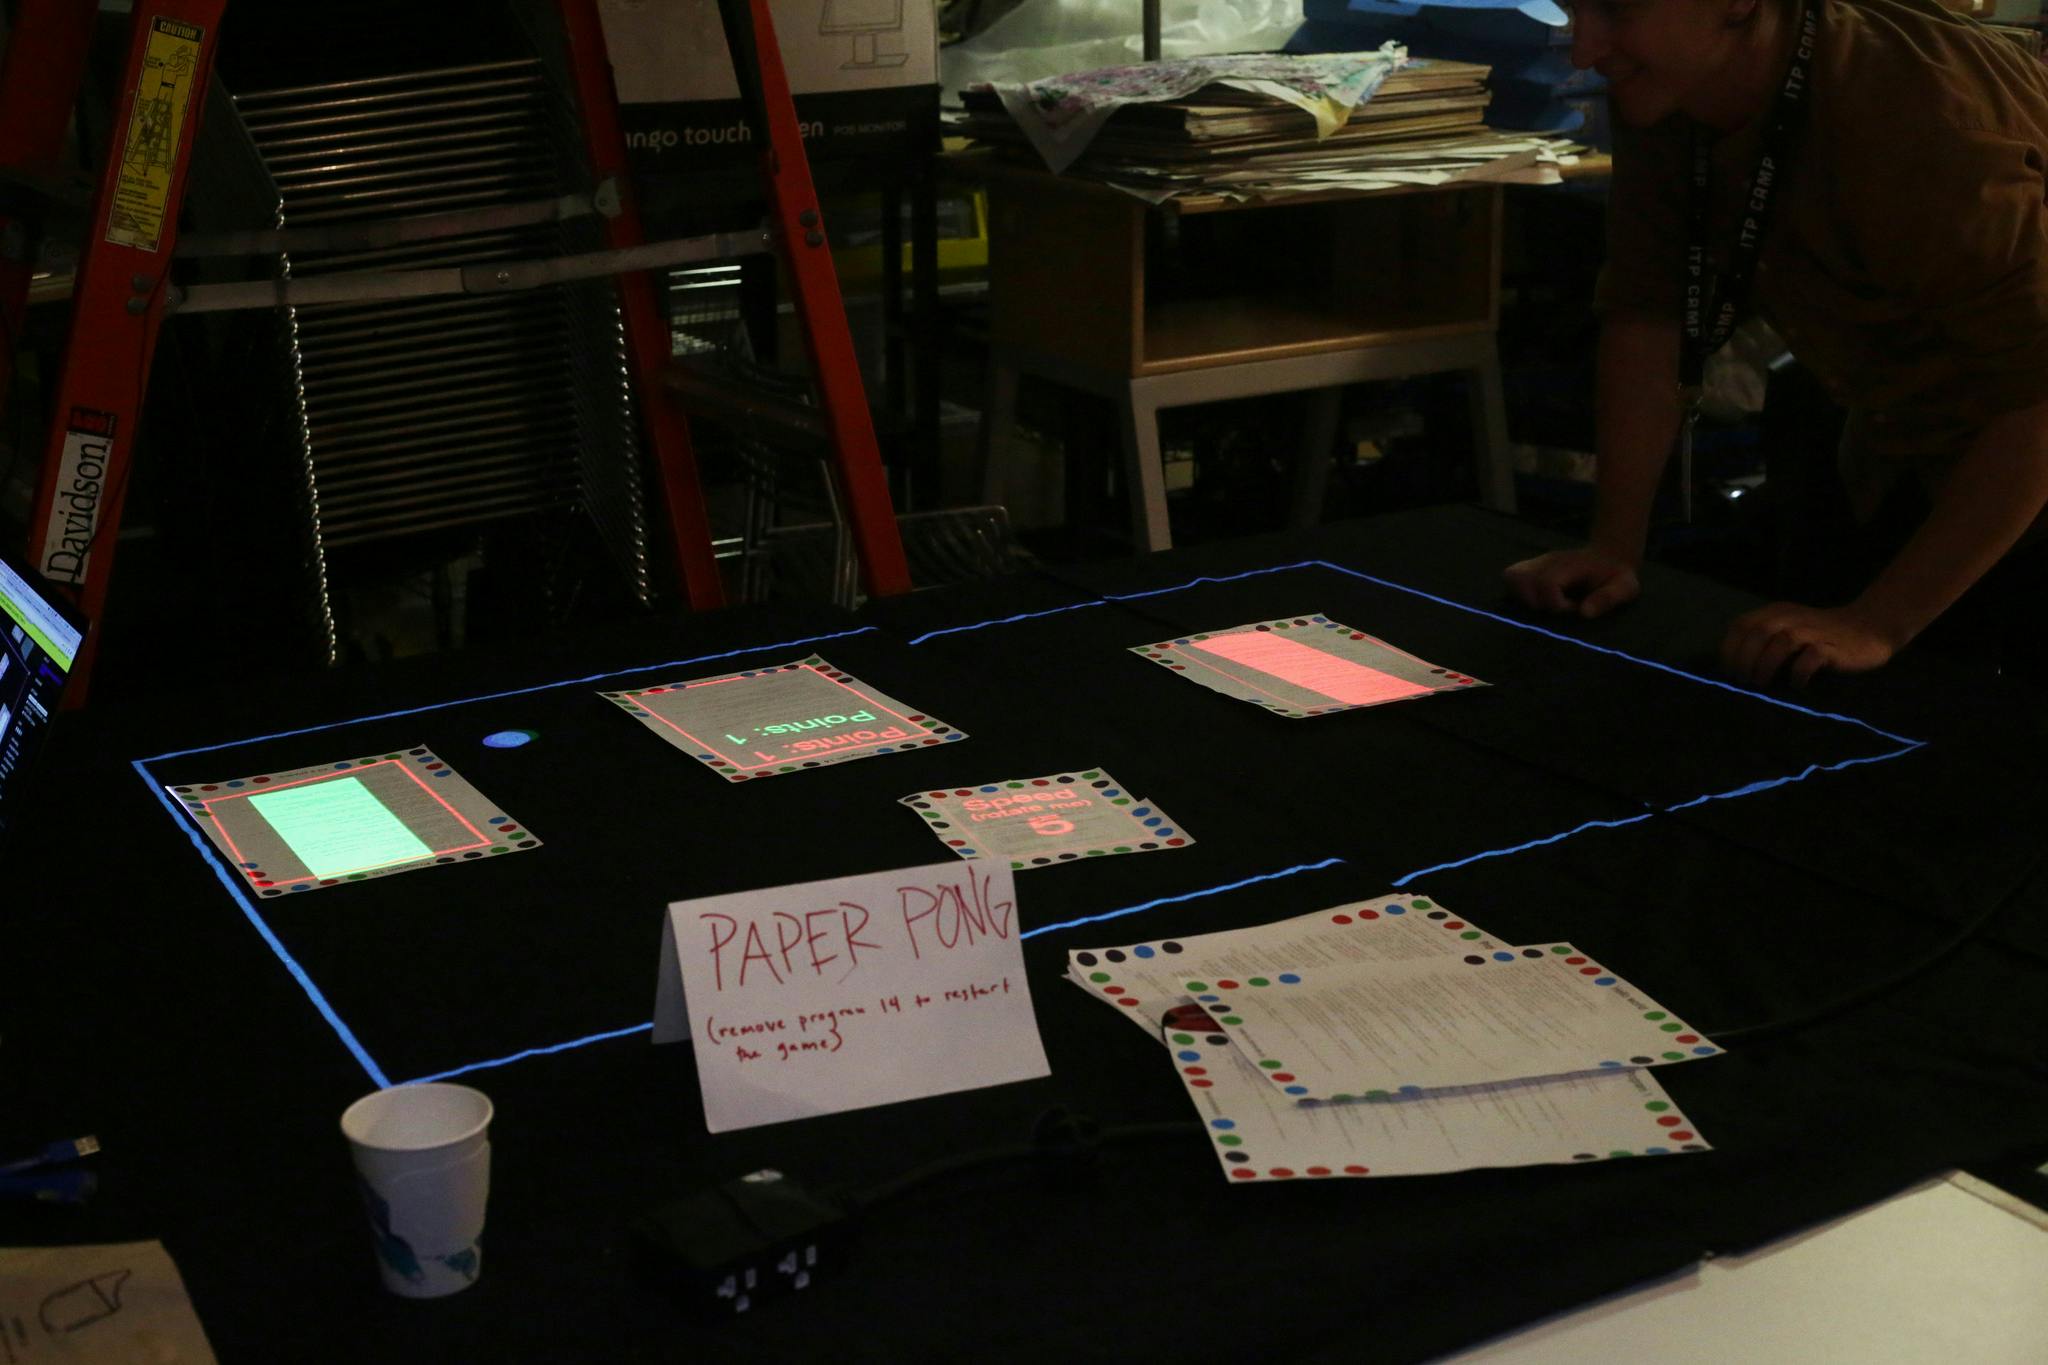 A projection-mapped game of pong played with pieces of paper